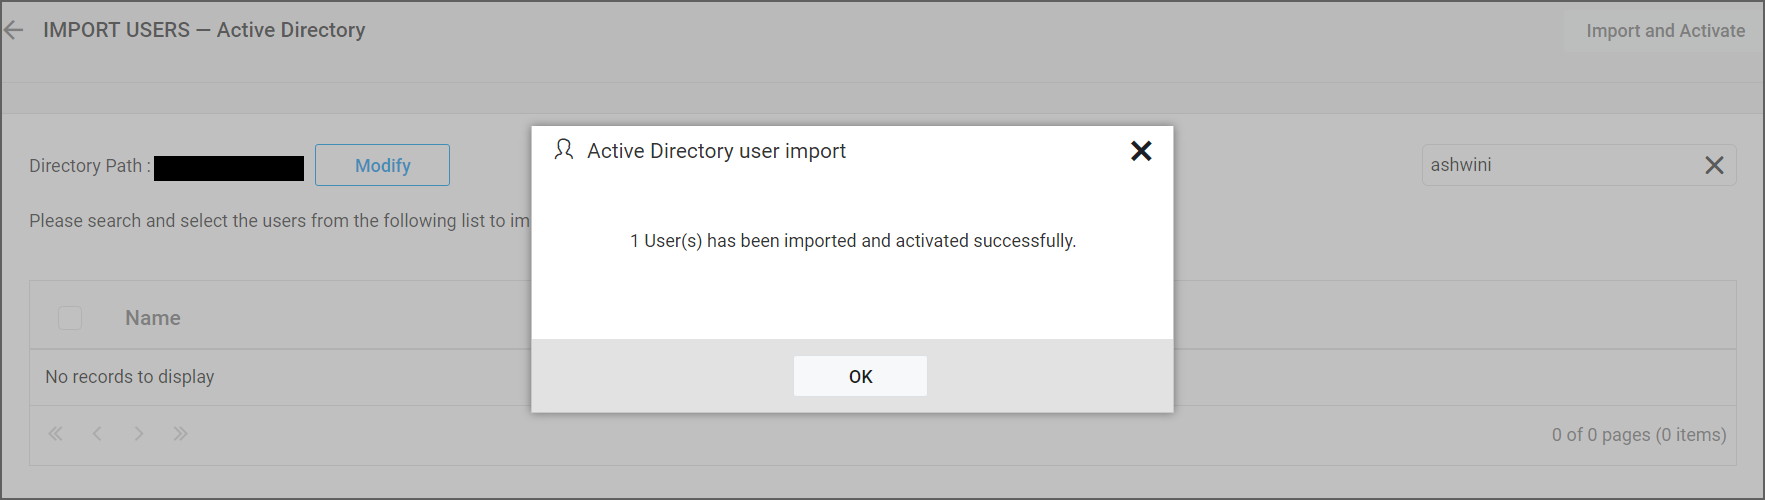 Success message after imported the Active Directory users